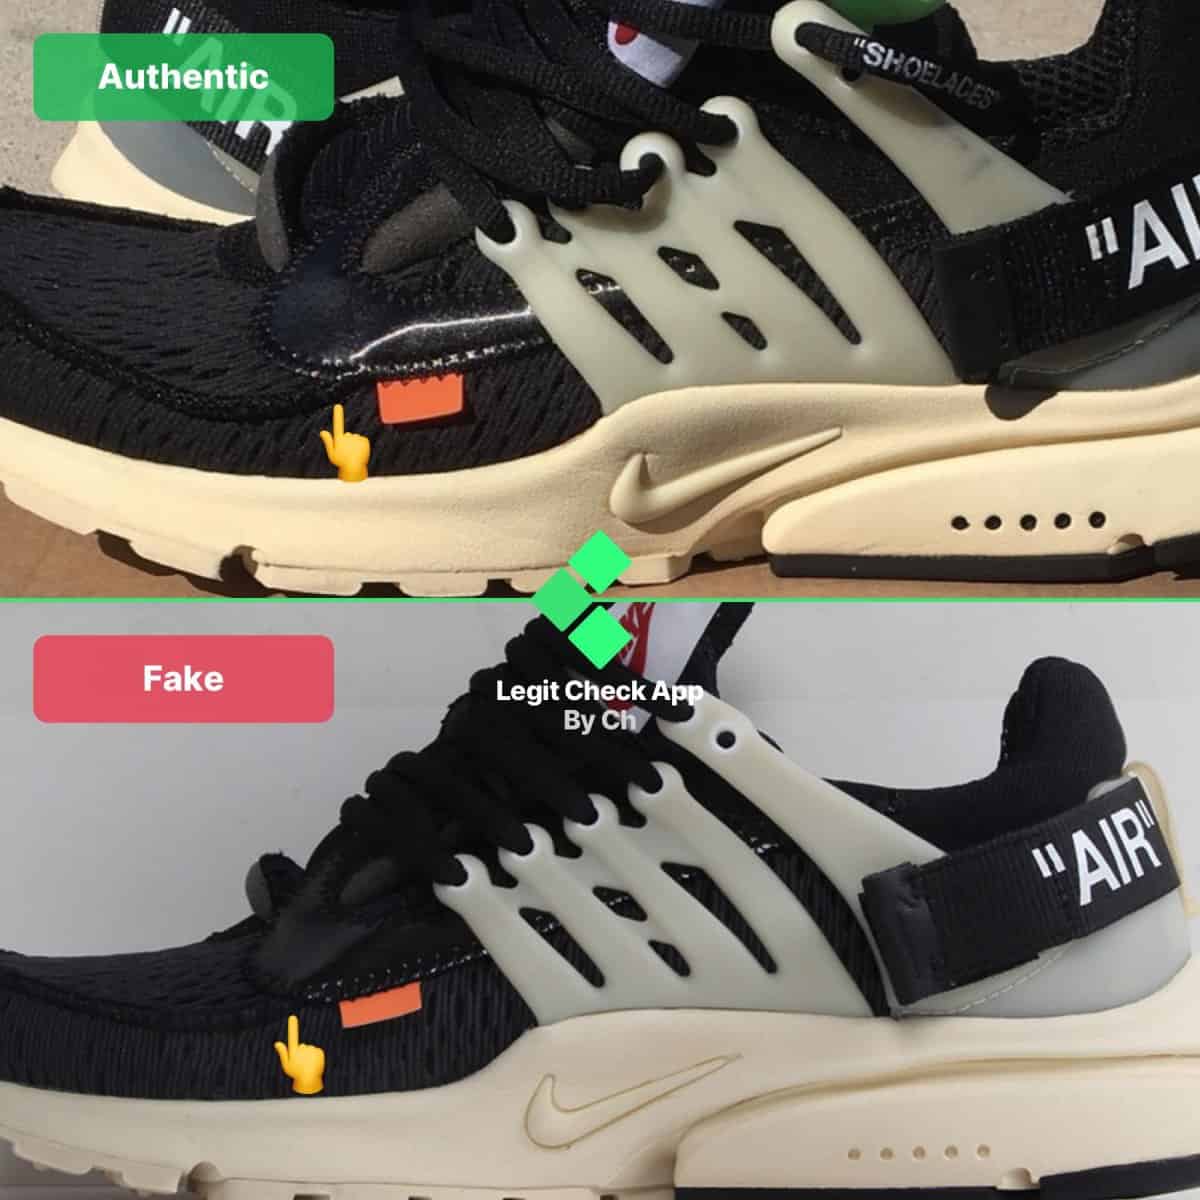 How To Spot Fake Off-White Air Presto OG - Legit Check By Ch